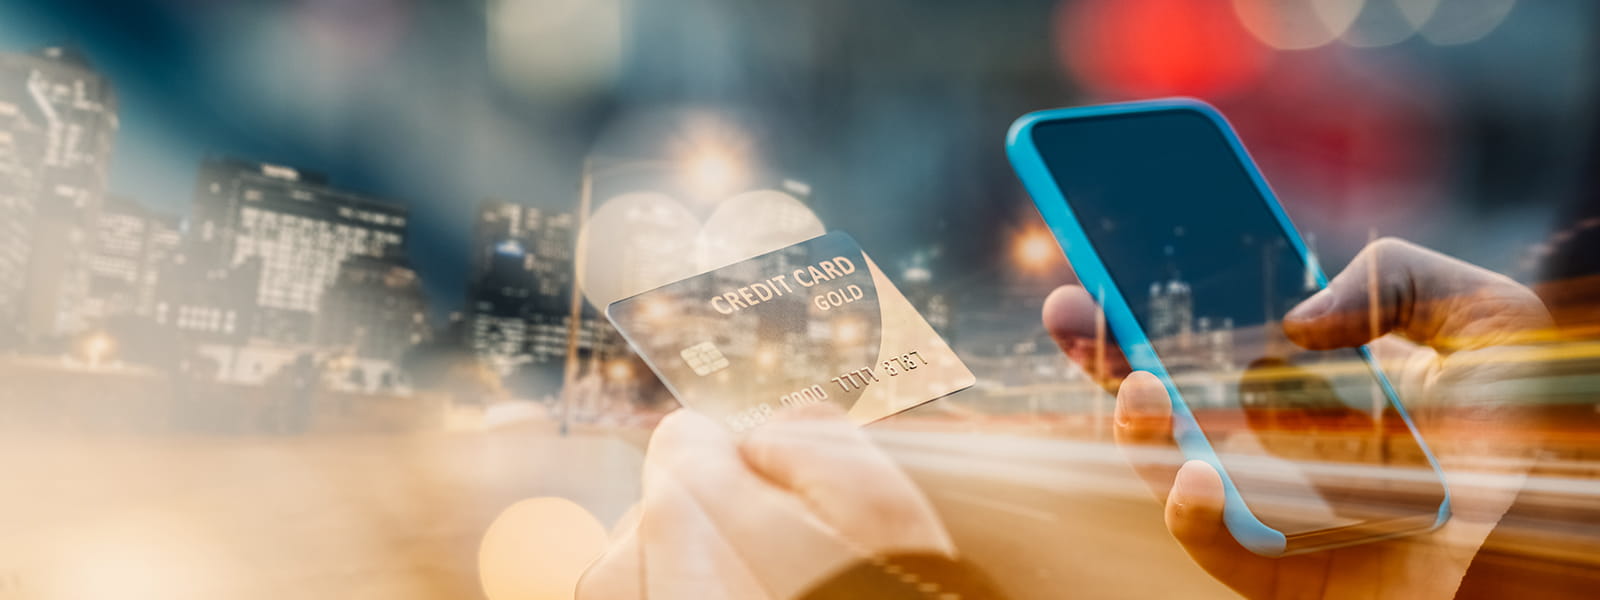 A person holding a mobile phone and credit card